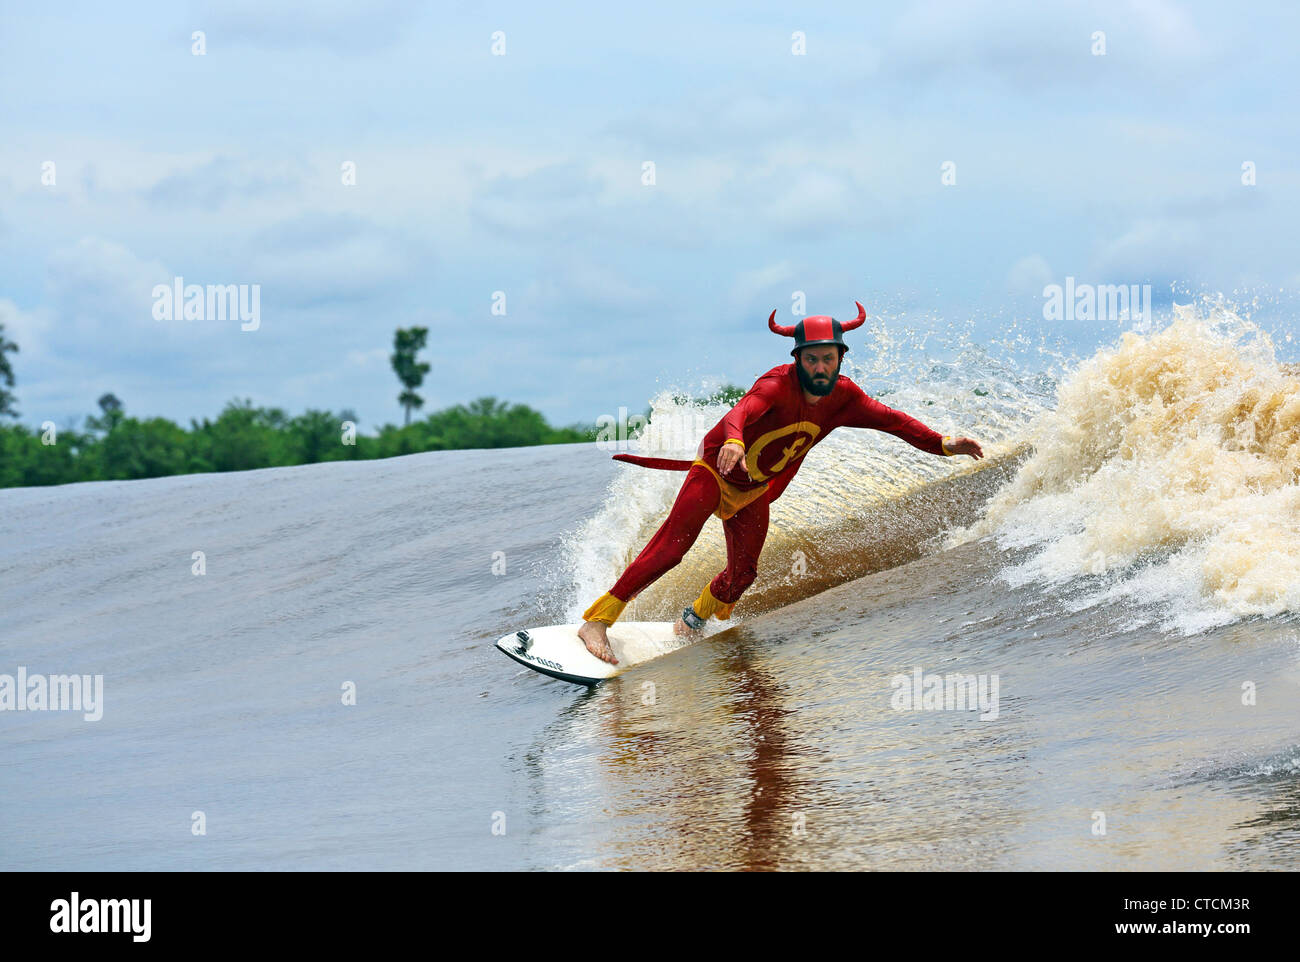 Strange man in red superhero costume river surfing a tidal bore wave on the Kampar River, also known as Bono or the 7 Ghosts. Stock Photo